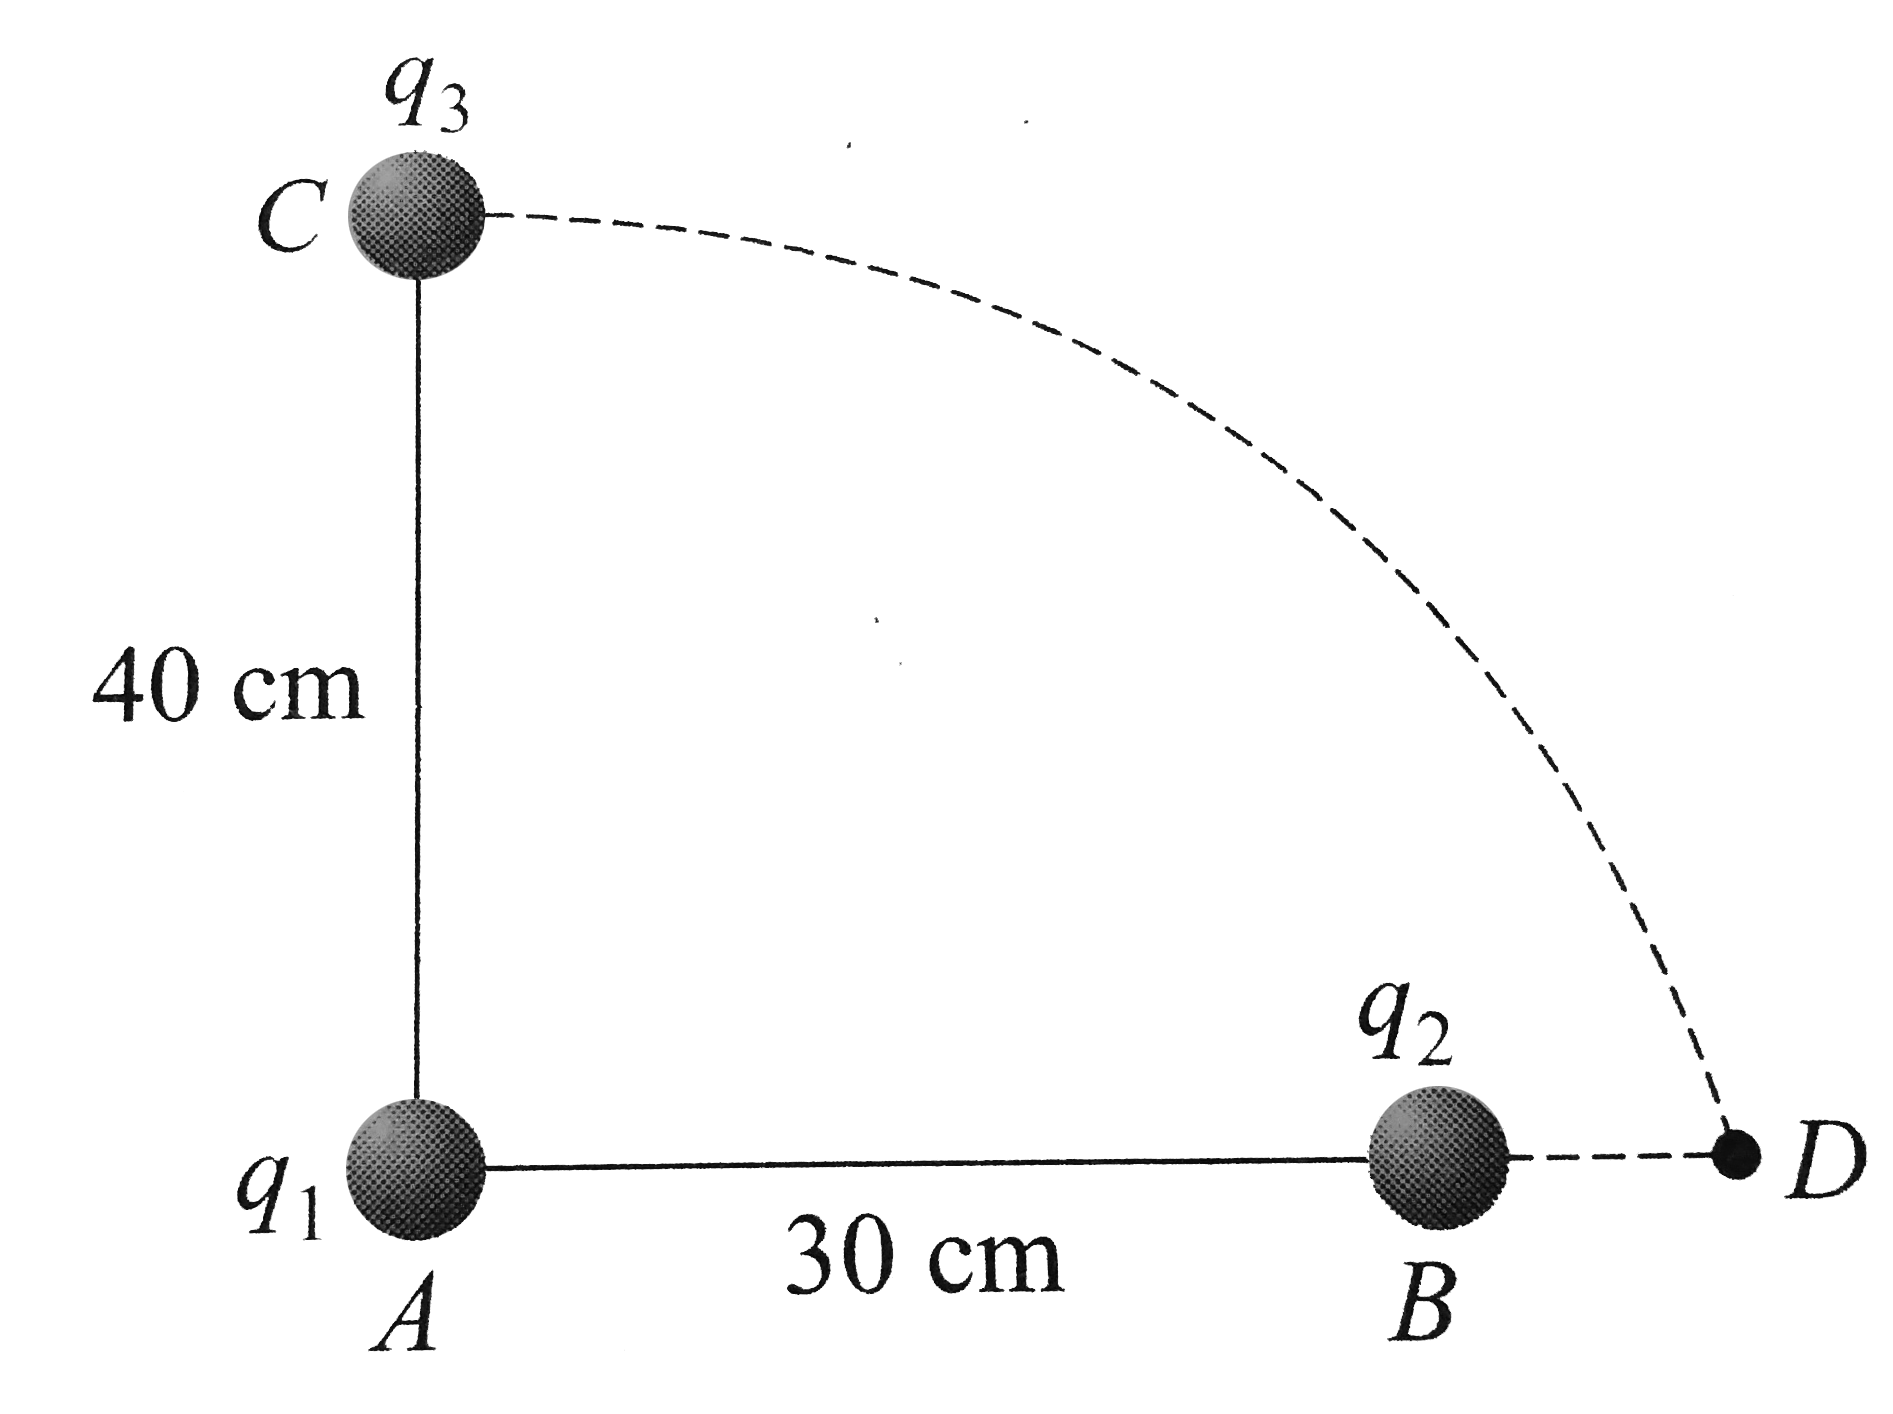 Two charges q(1) and q(2) are placed 30 cm apart, as shown in the figure. A third charge q(3) is moved along the arc of a circle of radius 40 cm from C to D. The change in the potential energy o fthe system is (q(3))/(4pi epsilon(0))k., where k is